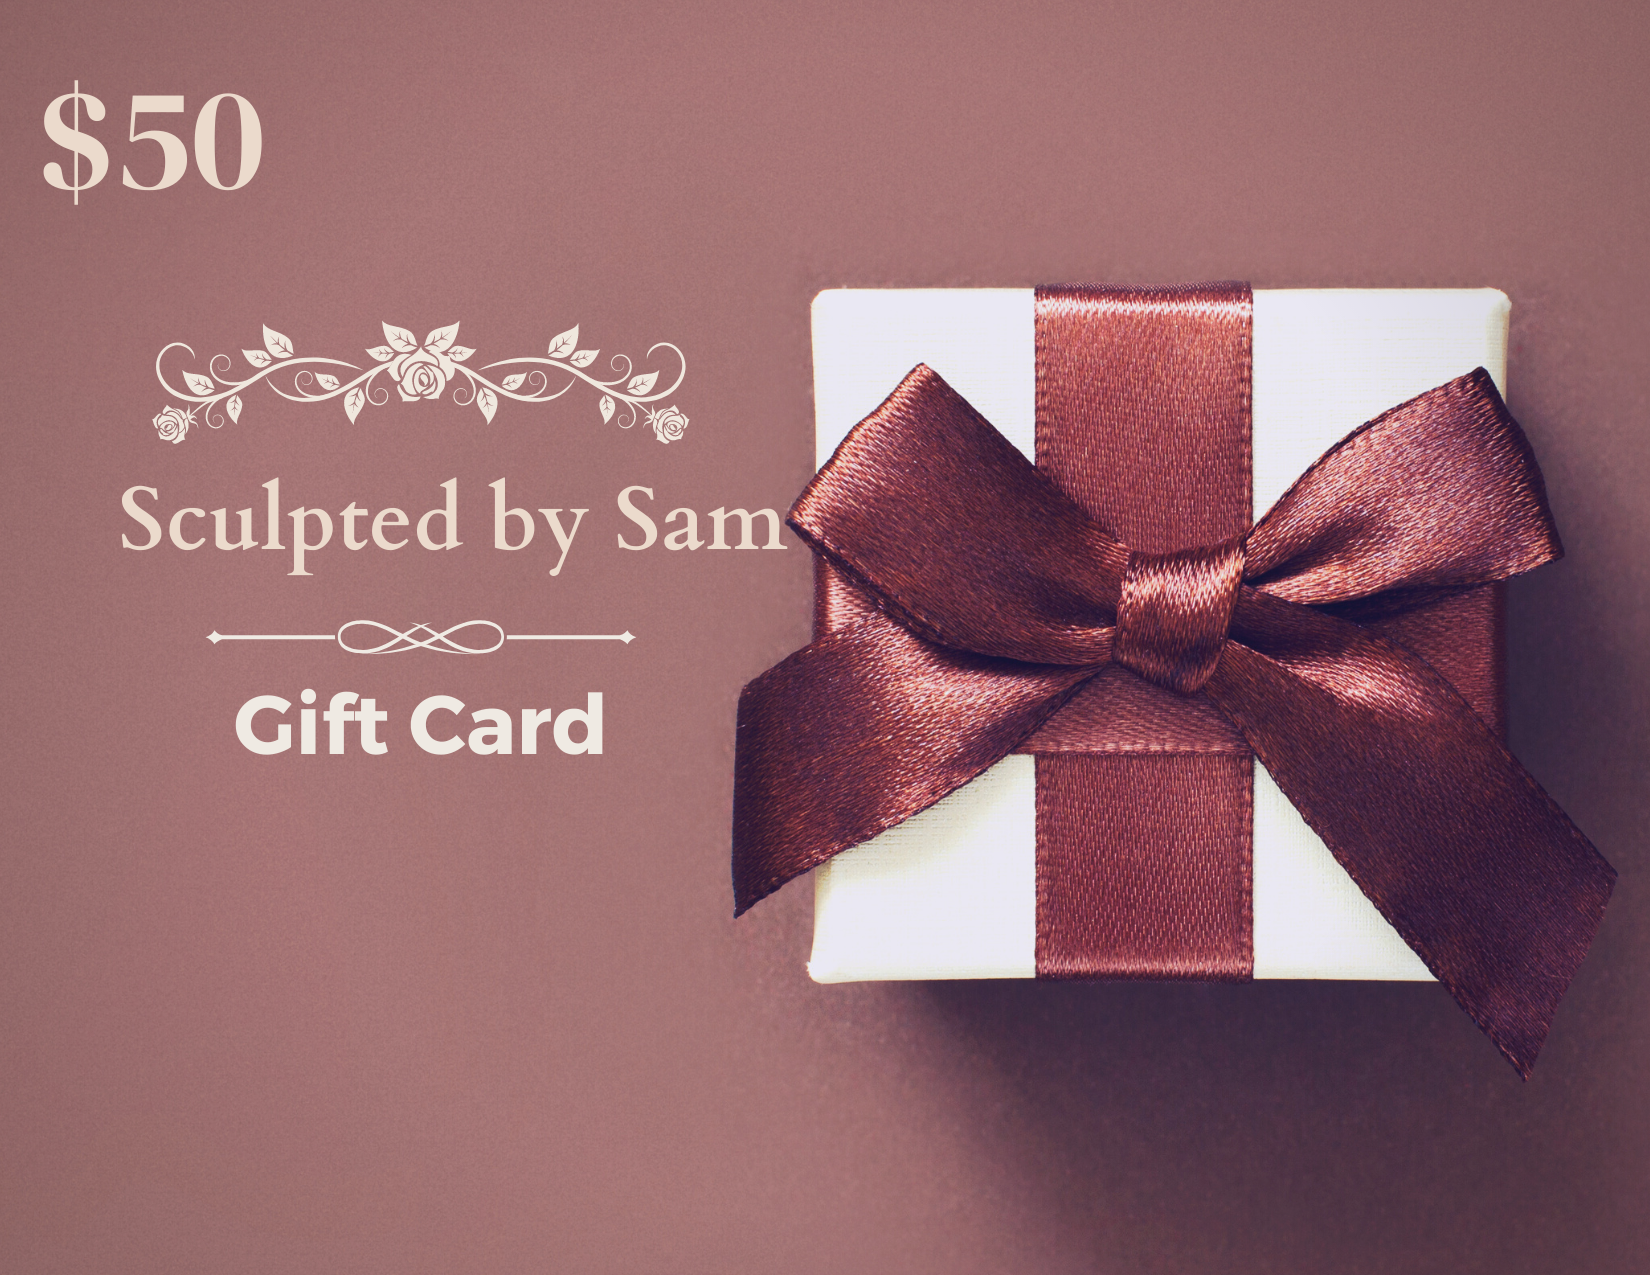 Sculpted by Sam Gift Card